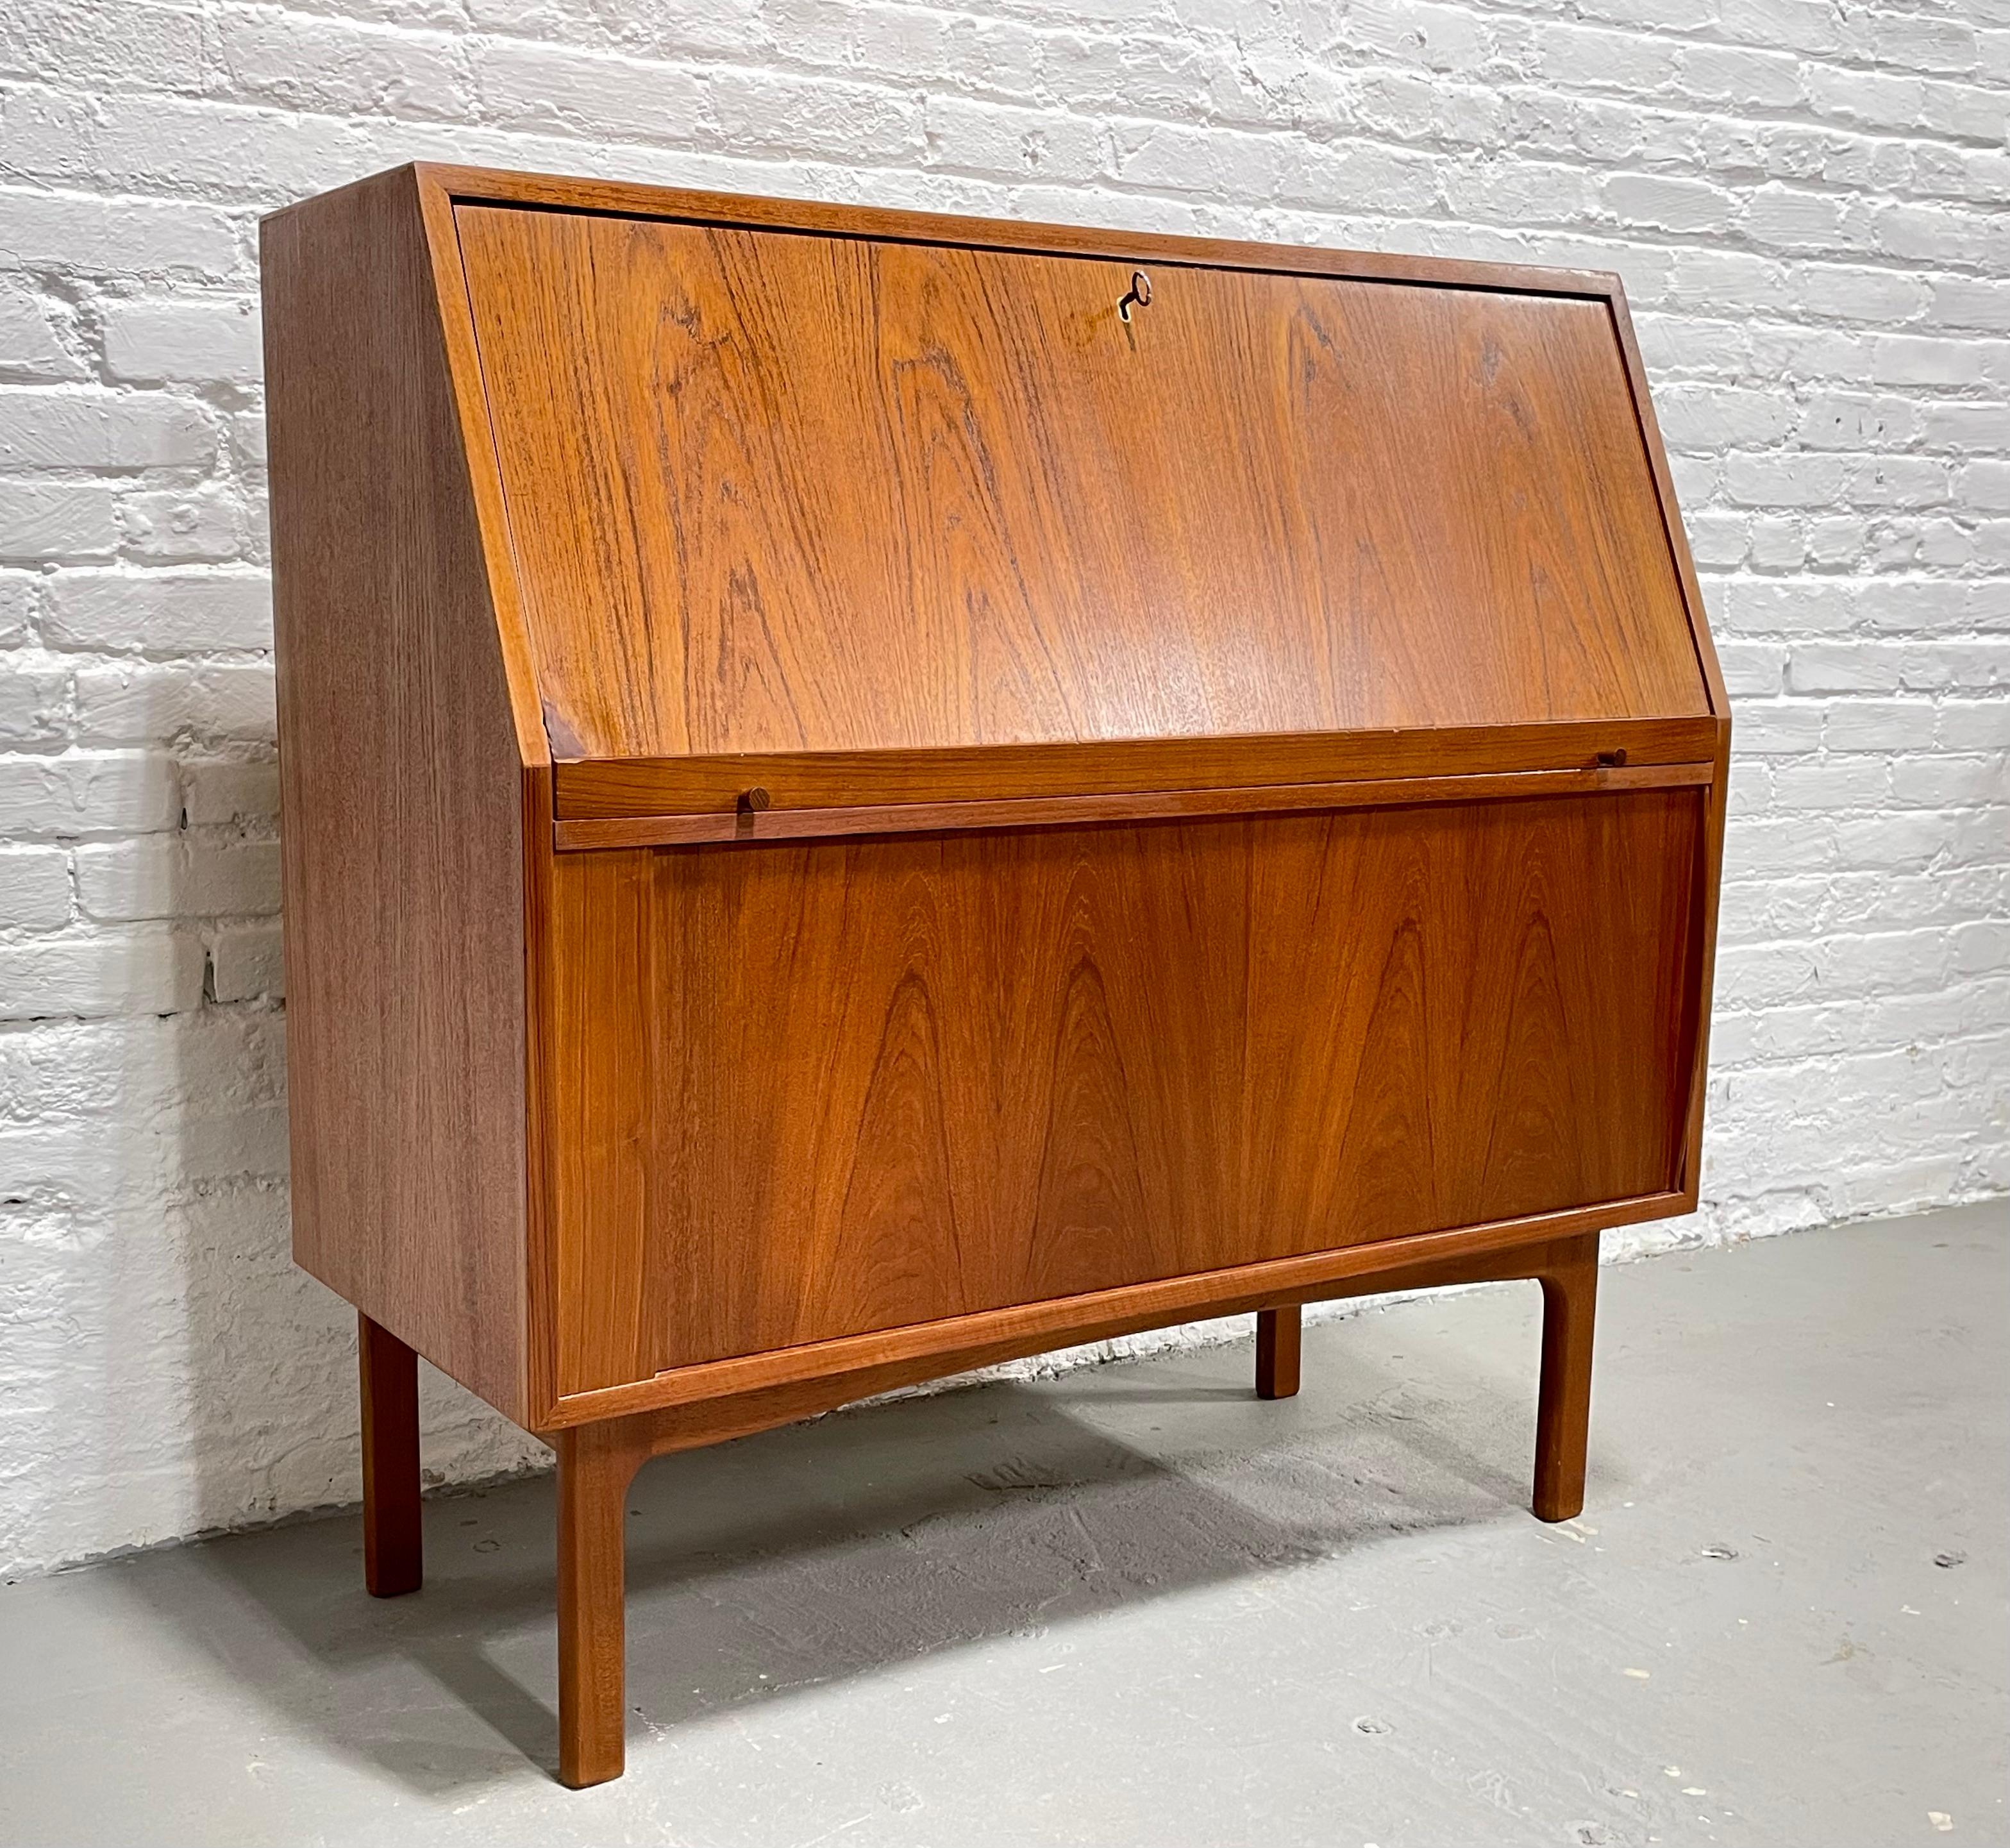 Vintage Mid-Century Modern Teak secretary desk + Tambour storage, Made in Denmark by BPS Bernhard Pedersen, c. 1960s. This piece boasts tons of delicious design details: upper area has a drop down desk with storage cubbies and drawers, perfect for